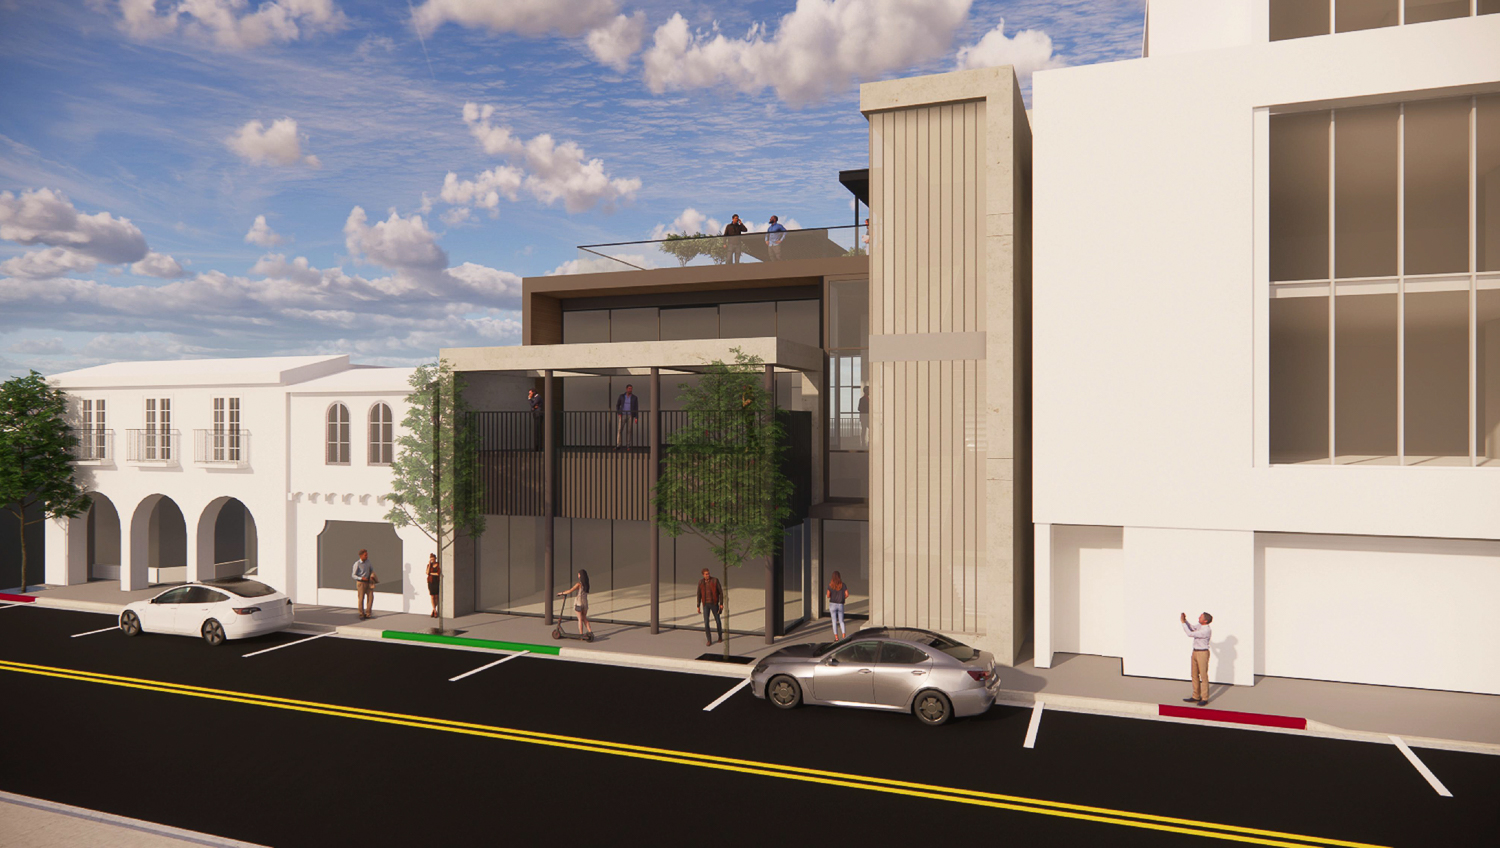 616 Ramona Street view from across the street, rendering by Hayes Group Architects